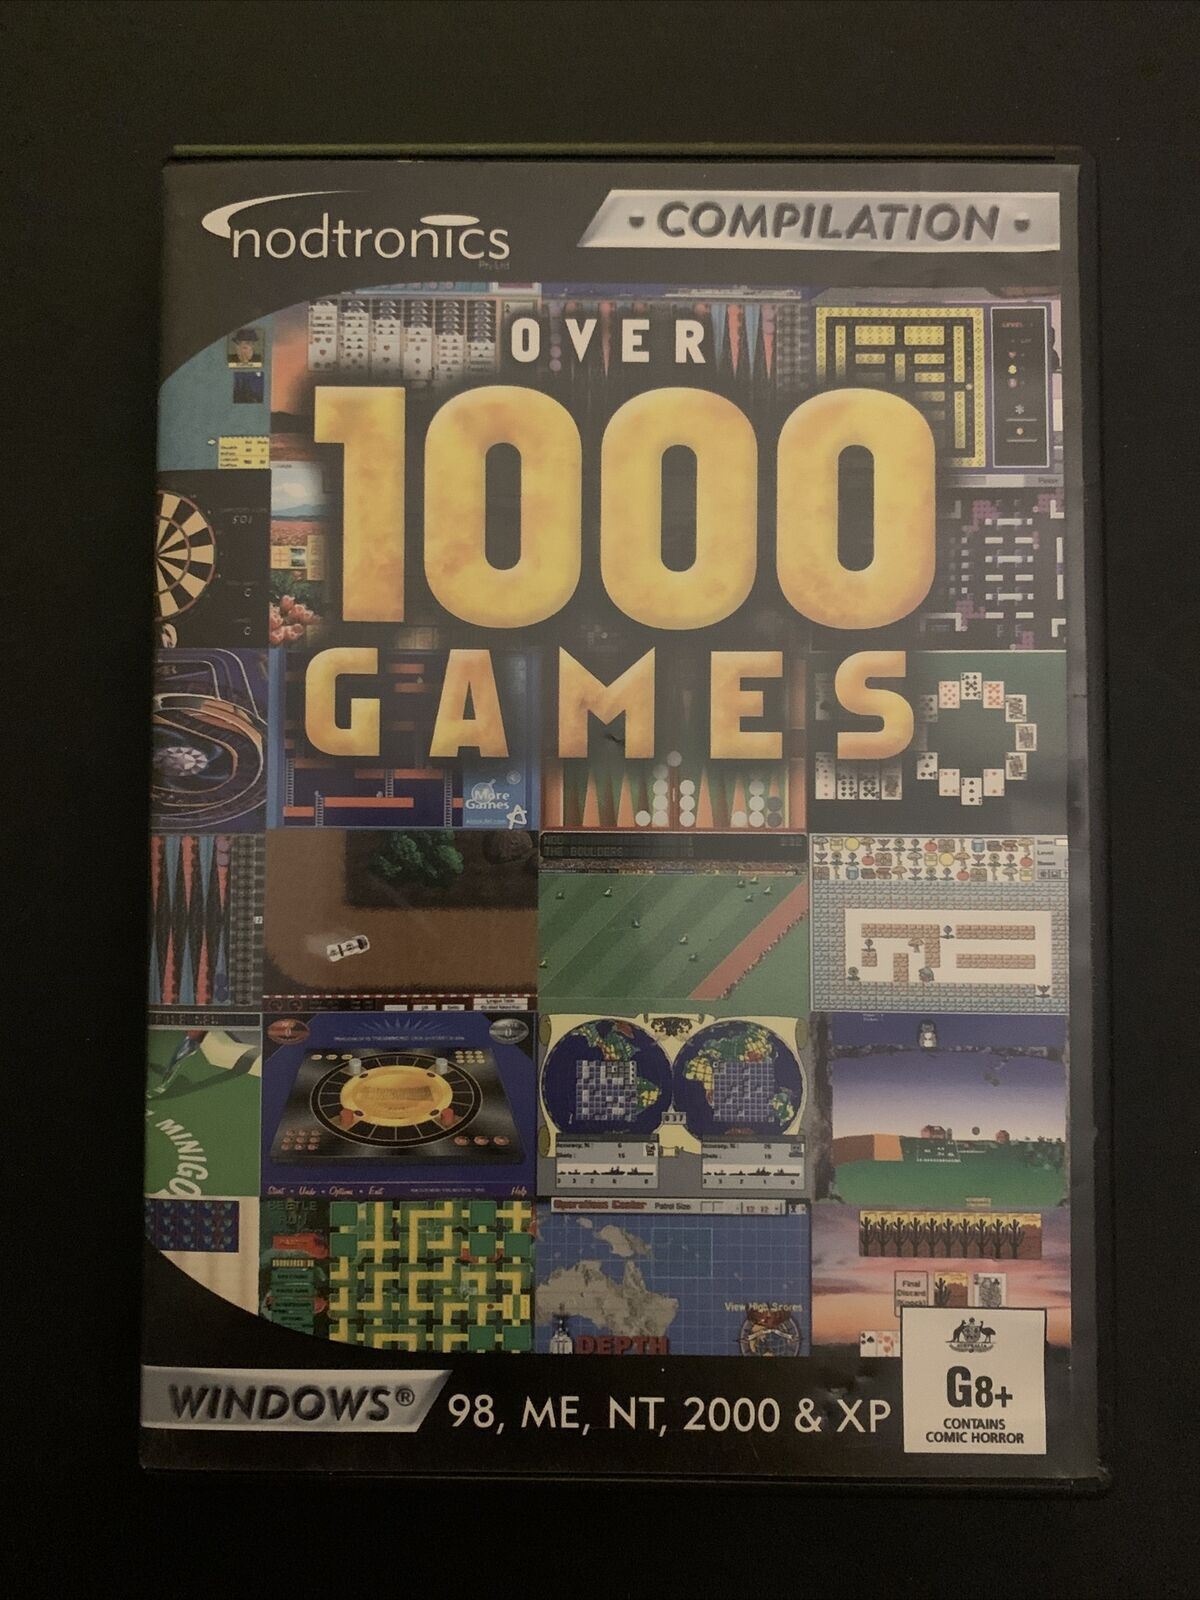 Over 1000 Games For Windows PC - CD-Rom Games Nodtronics